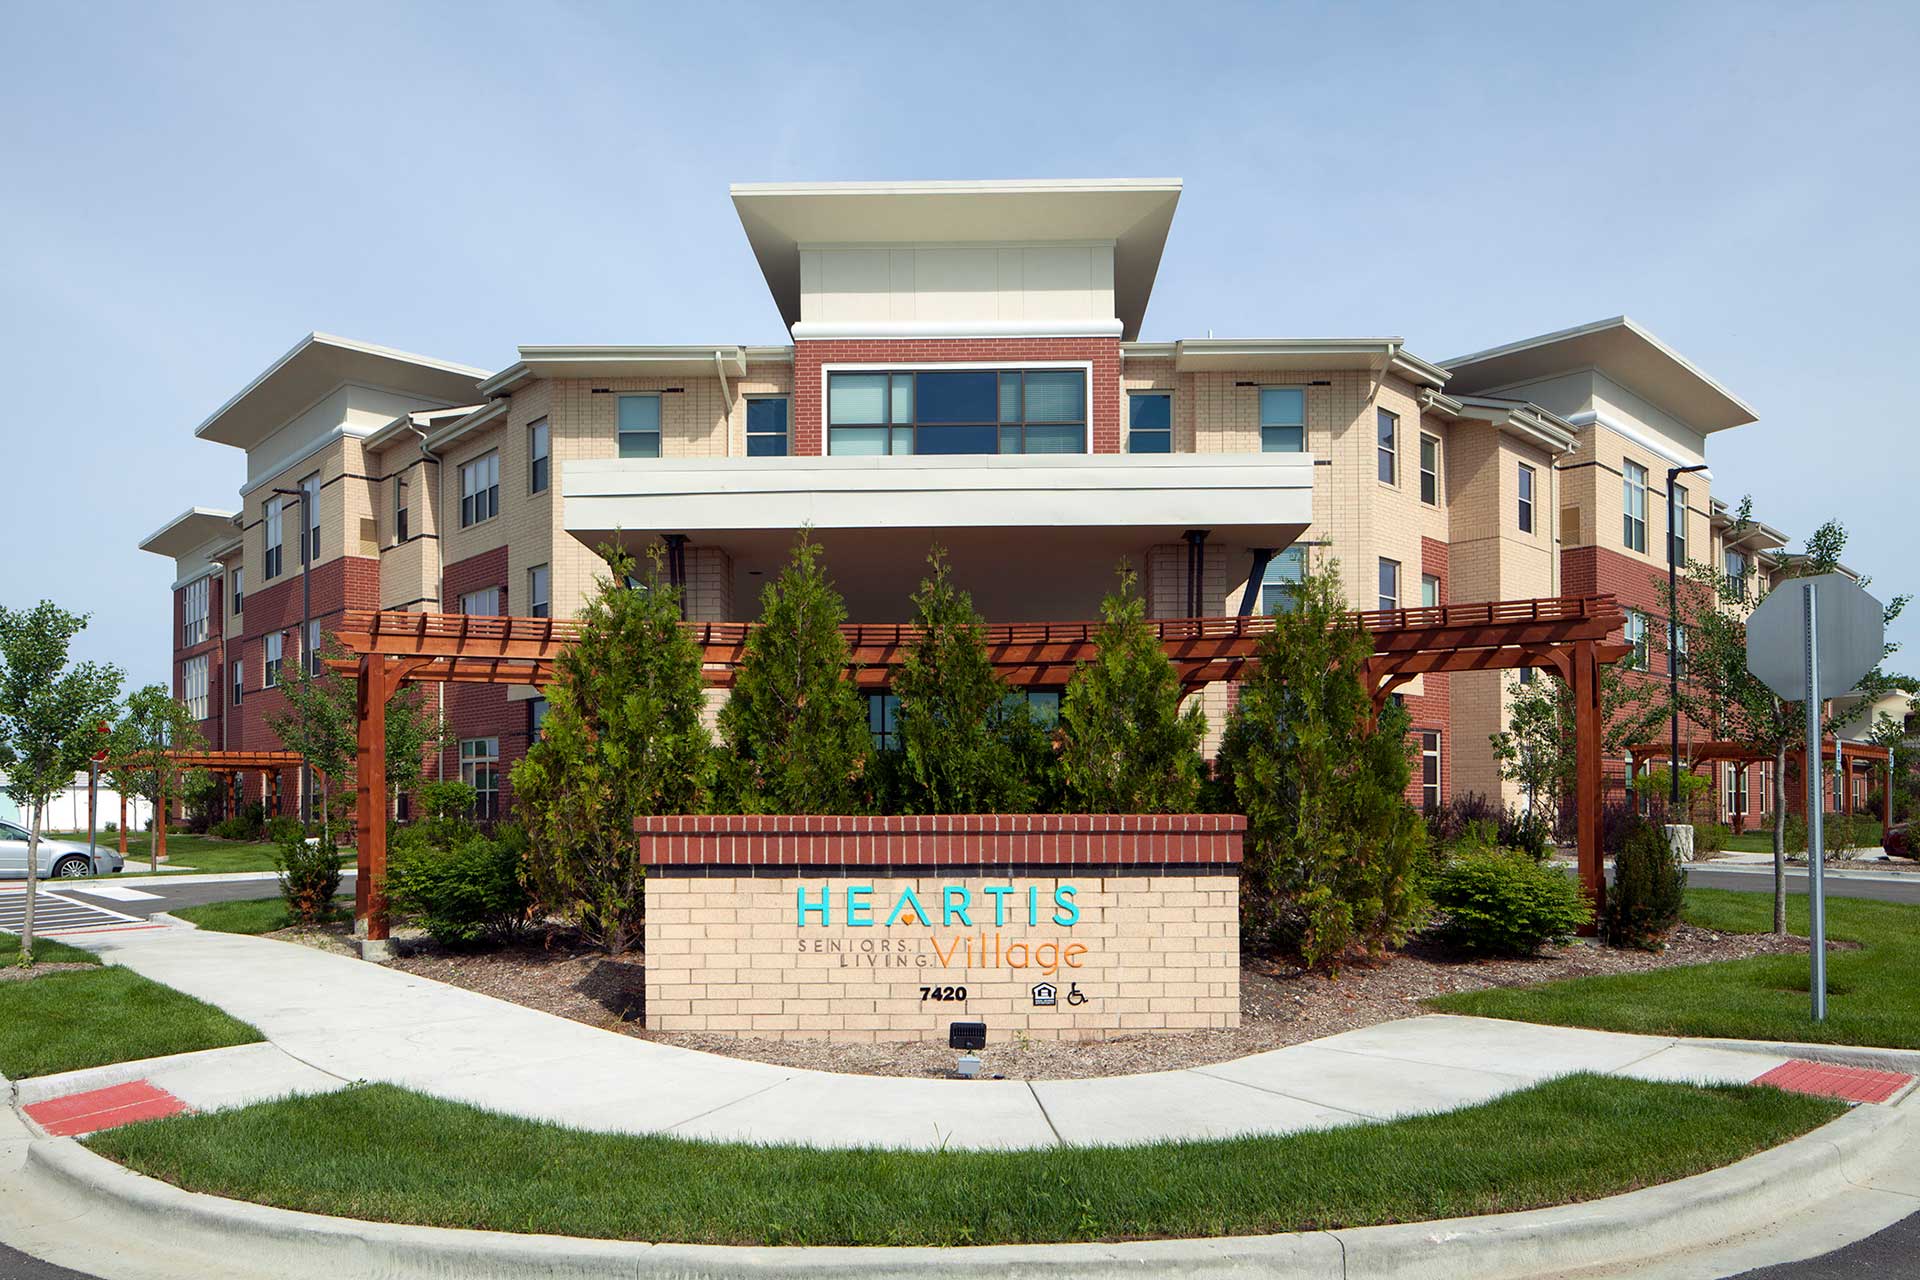 Heartis Village assisted living and memory care community in Orland Park, Illinois